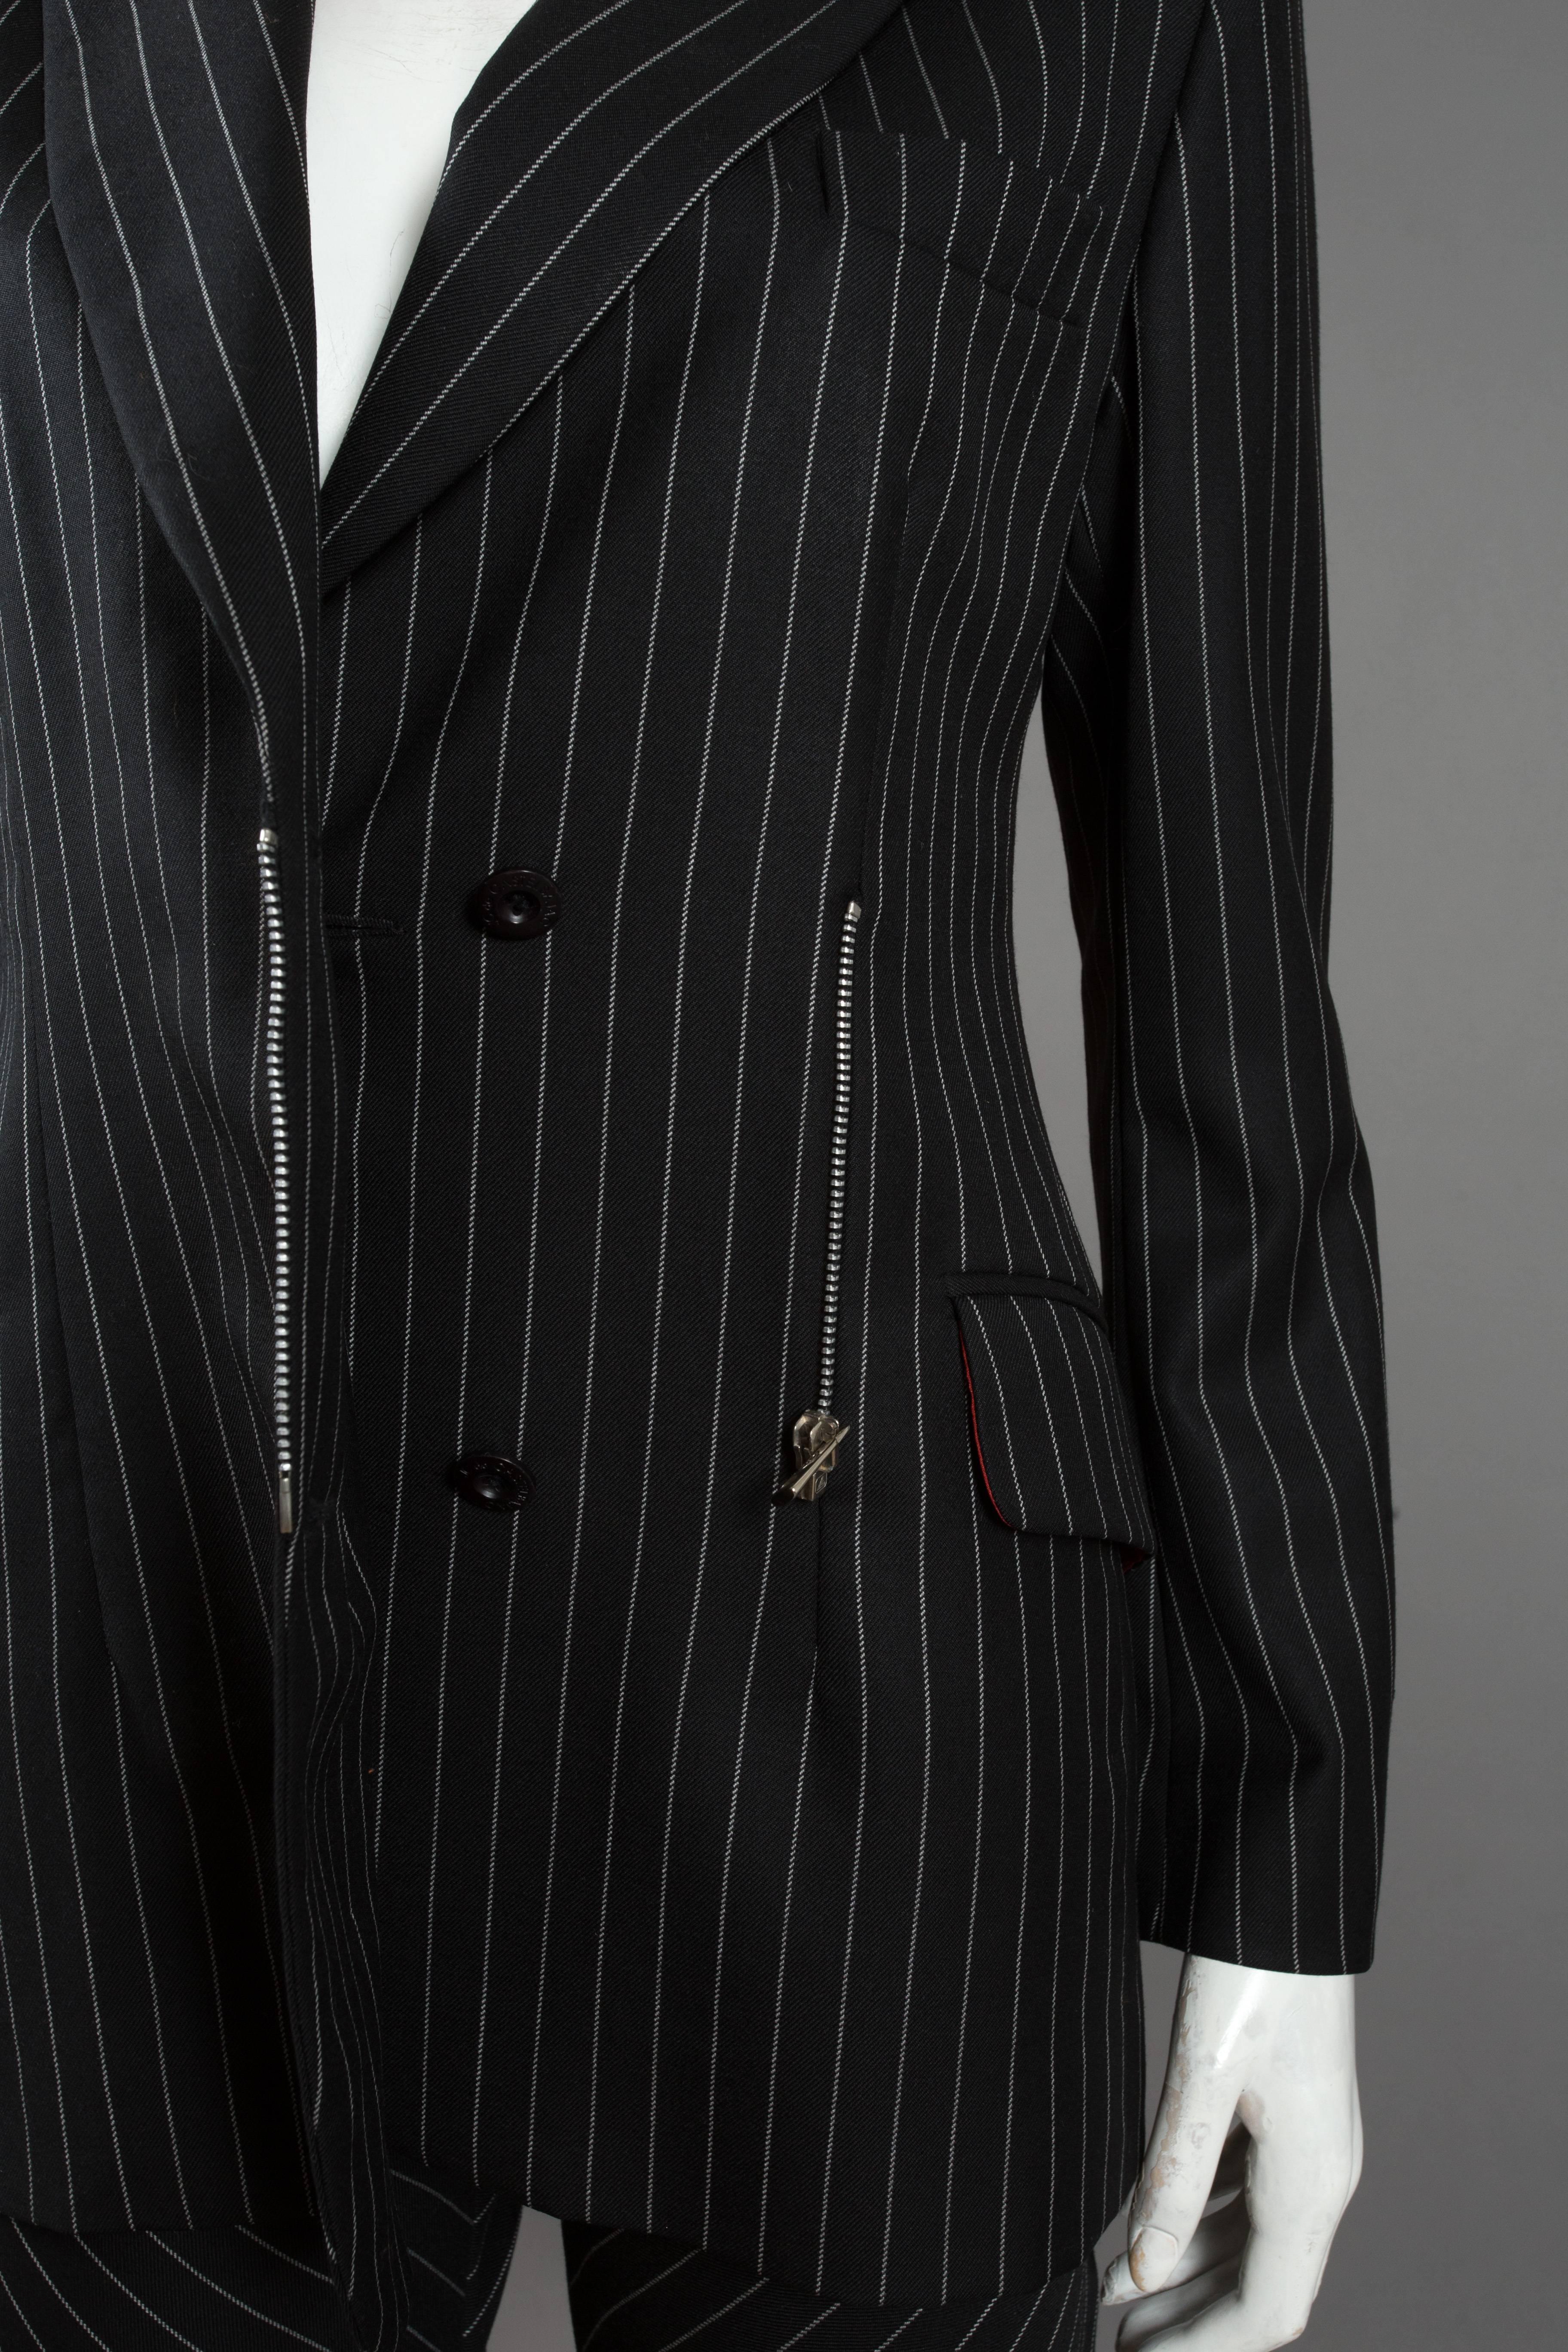 Jean-Charles de Castelbajac black pinstripe wool pant suit, c. 1990 In Excellent Condition For Sale In London, GB